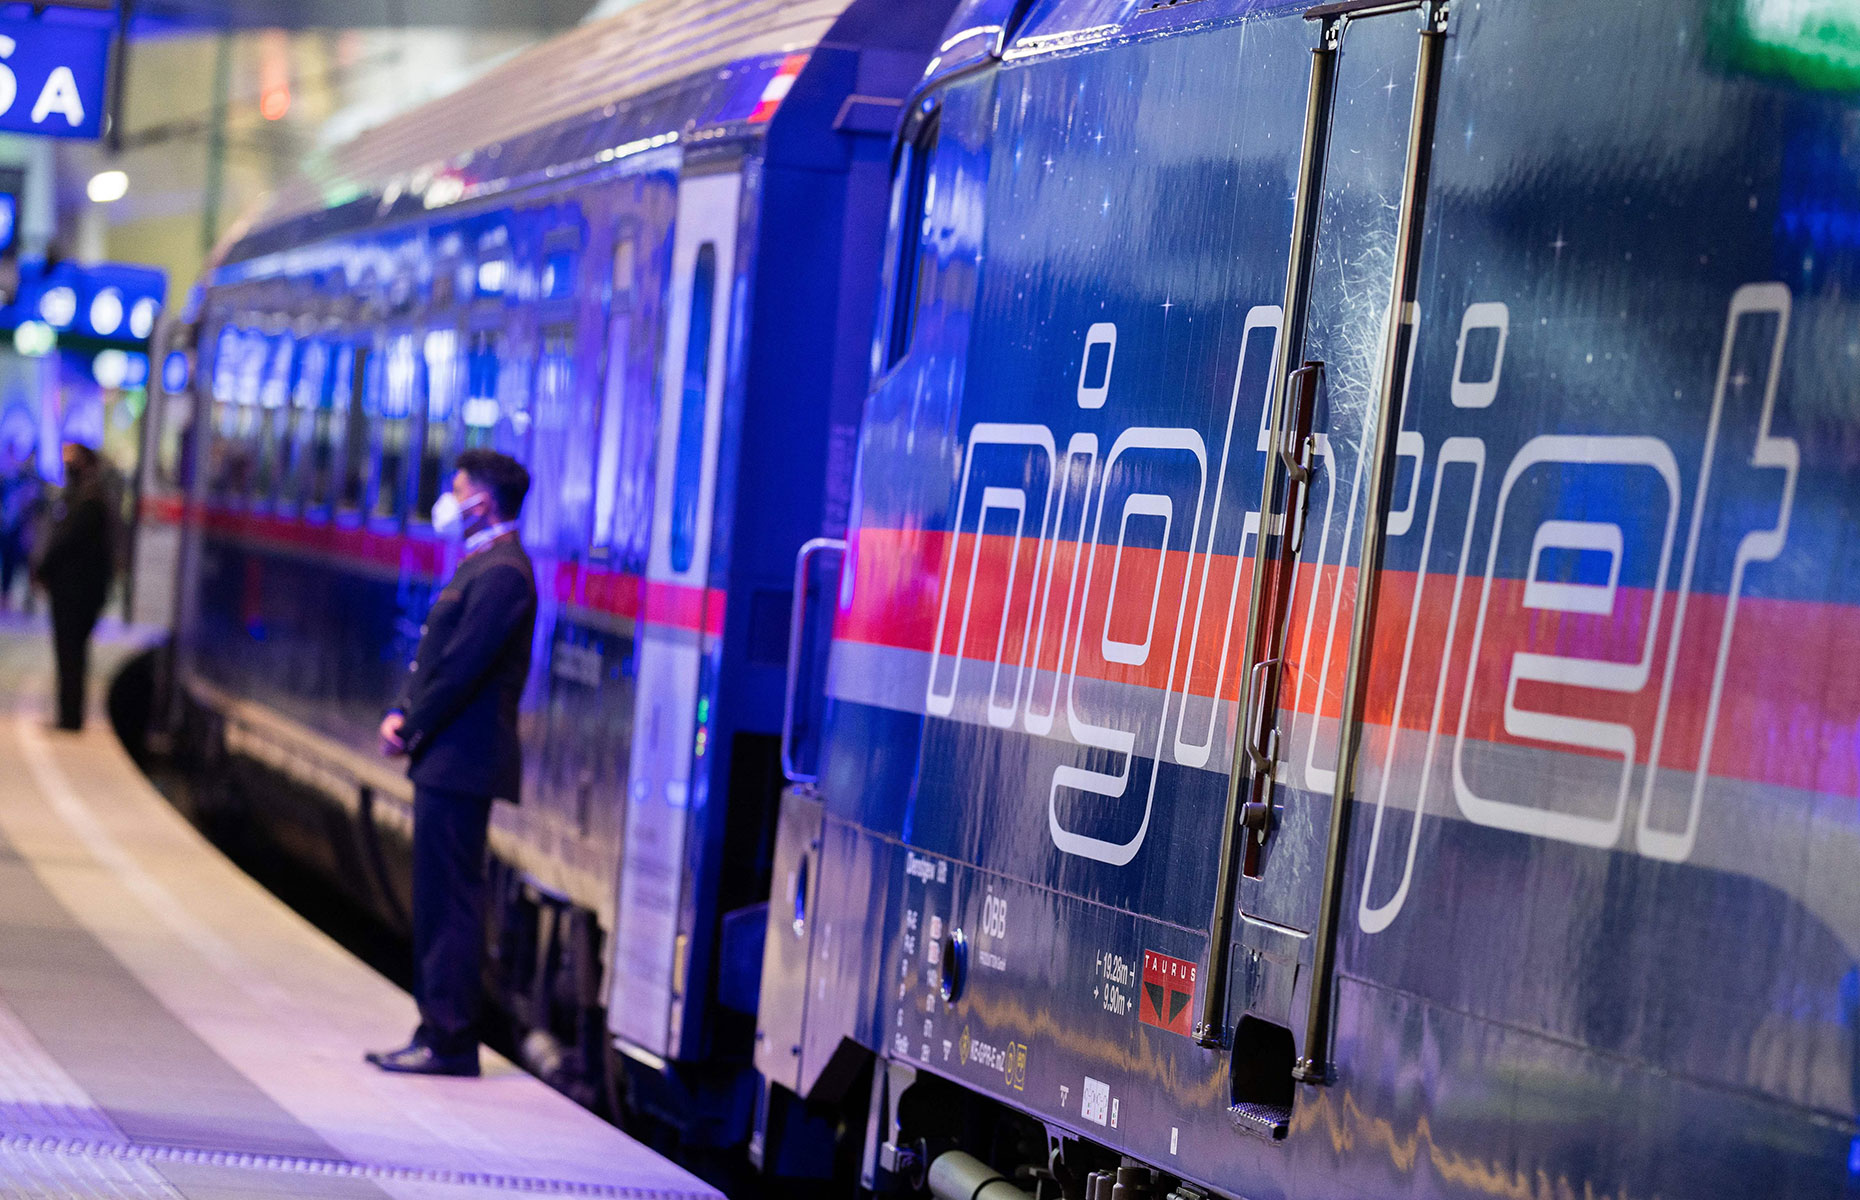 The Nighjet at Vienna's main train station (Image: GEORG HOCHMUTH/APA/AFP via Getty Images)